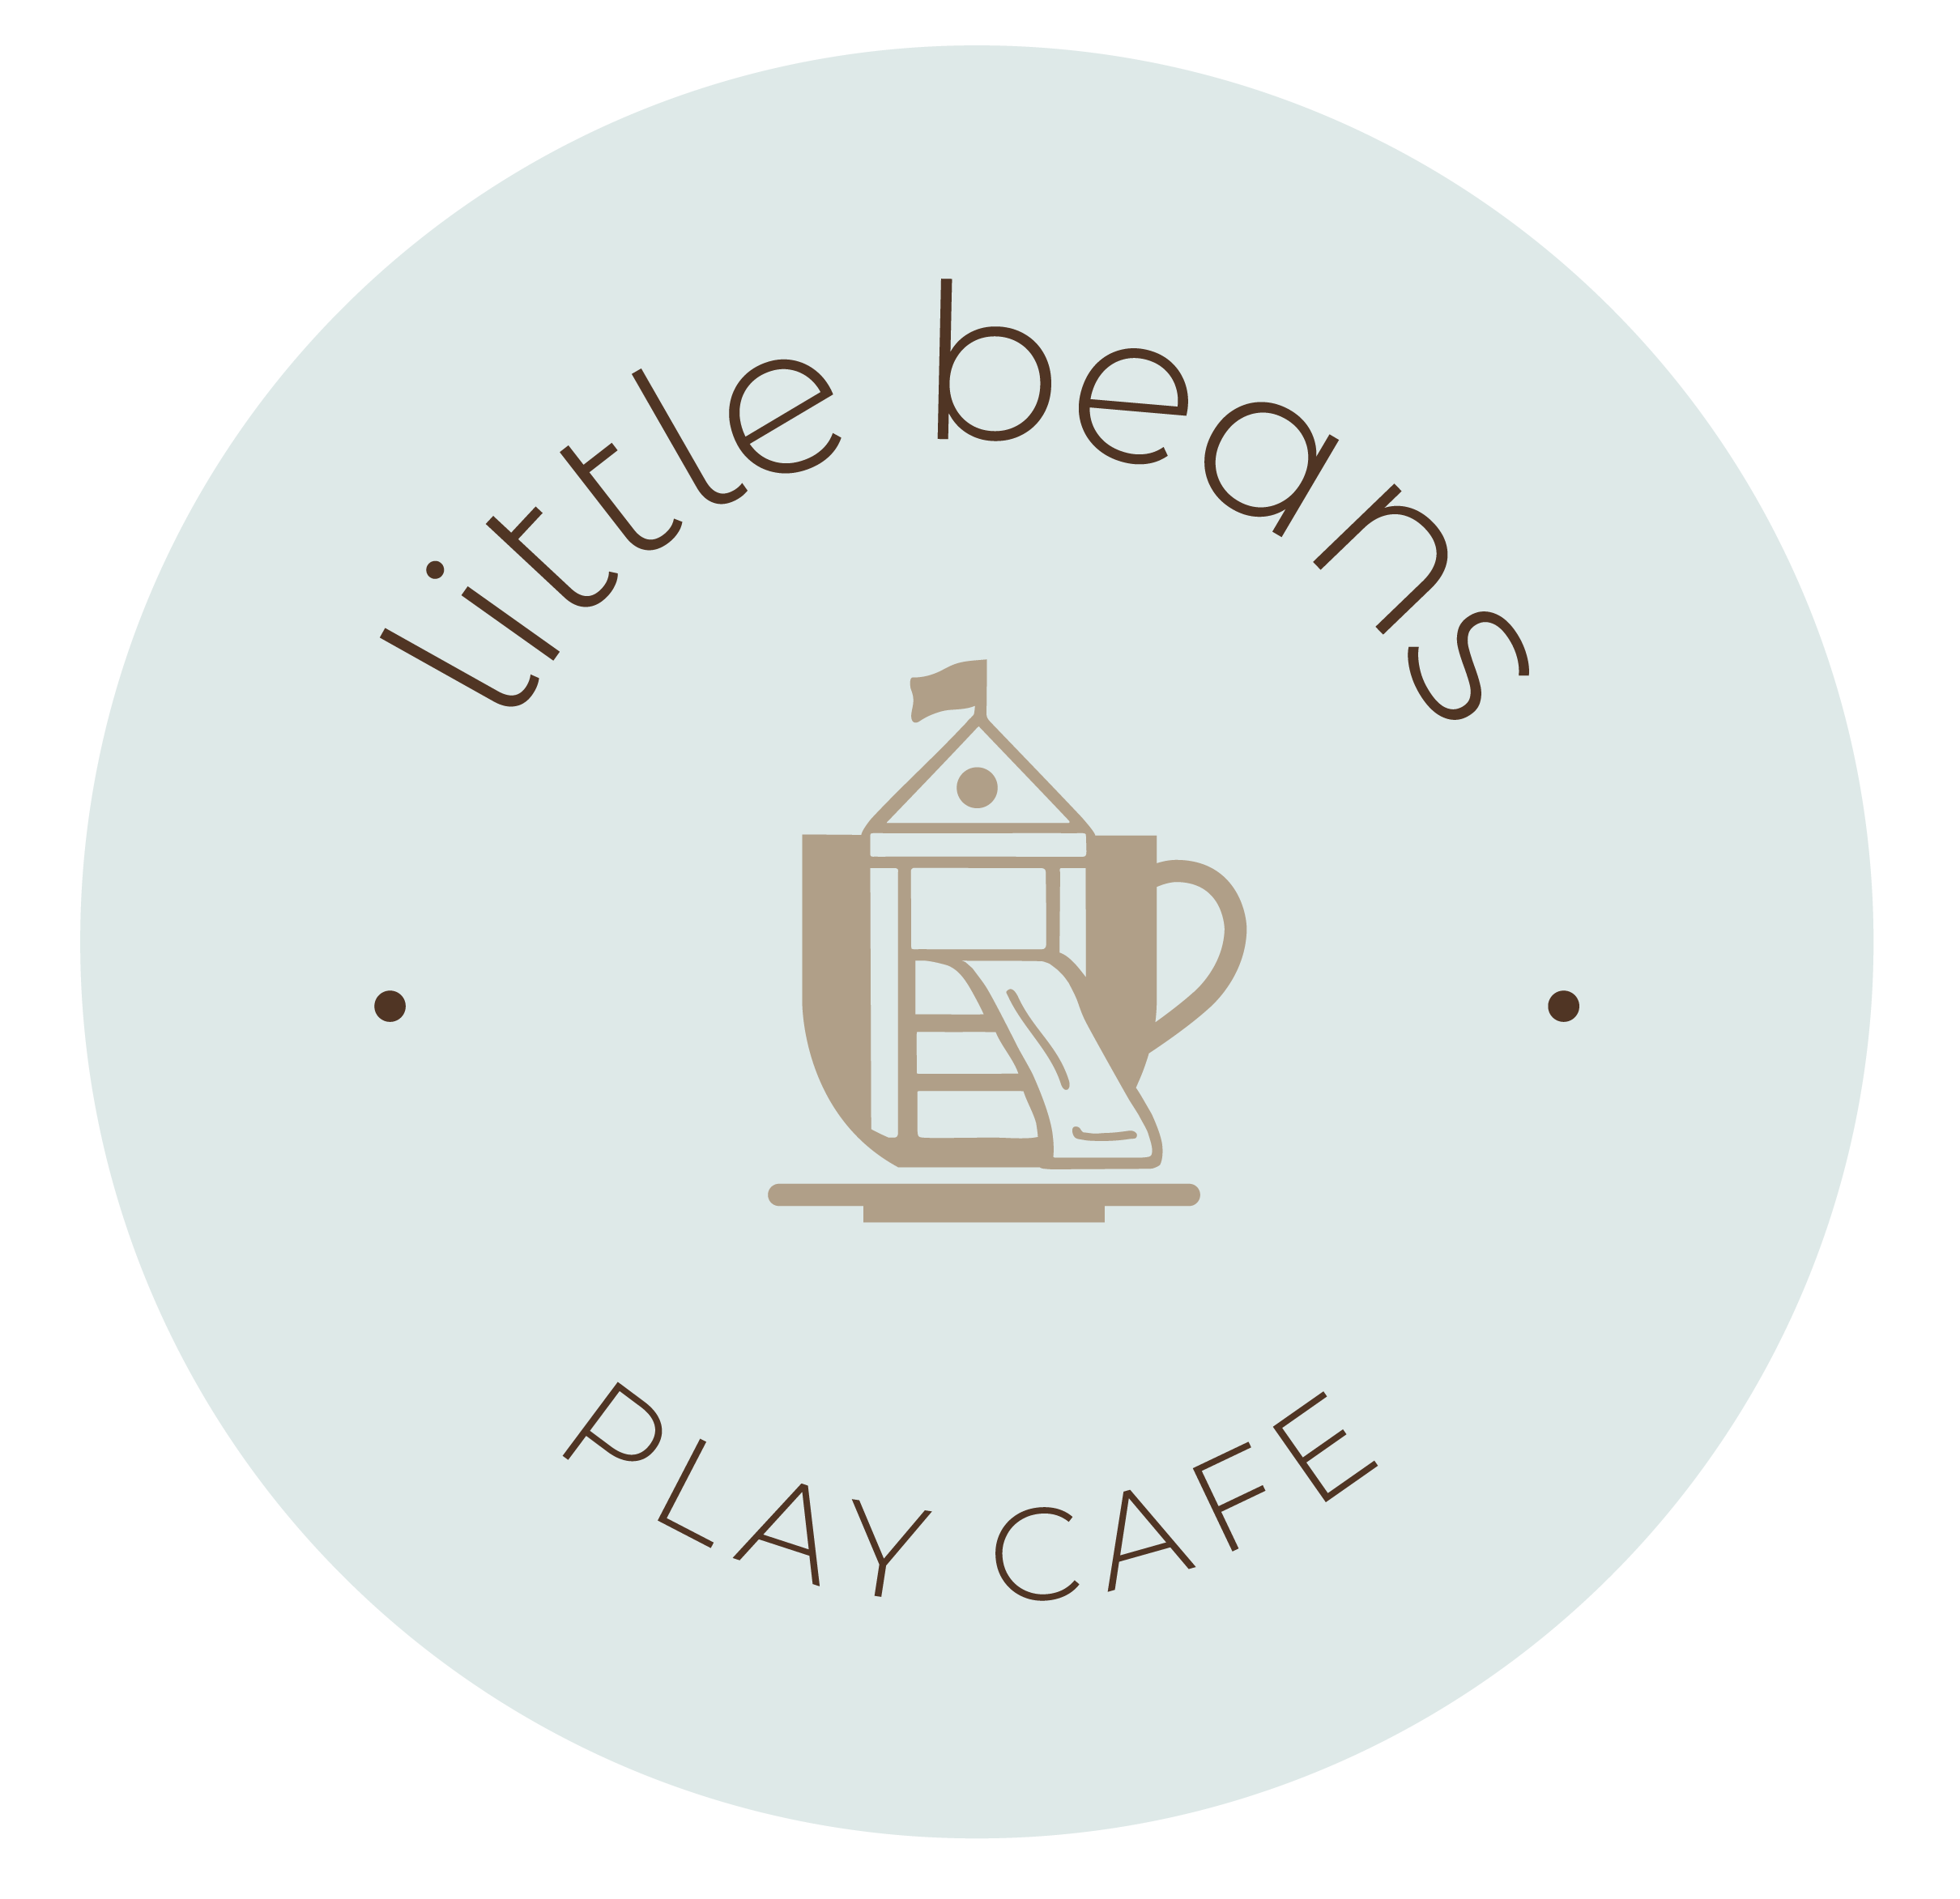 Little Beans Play Cafe in Port Moody